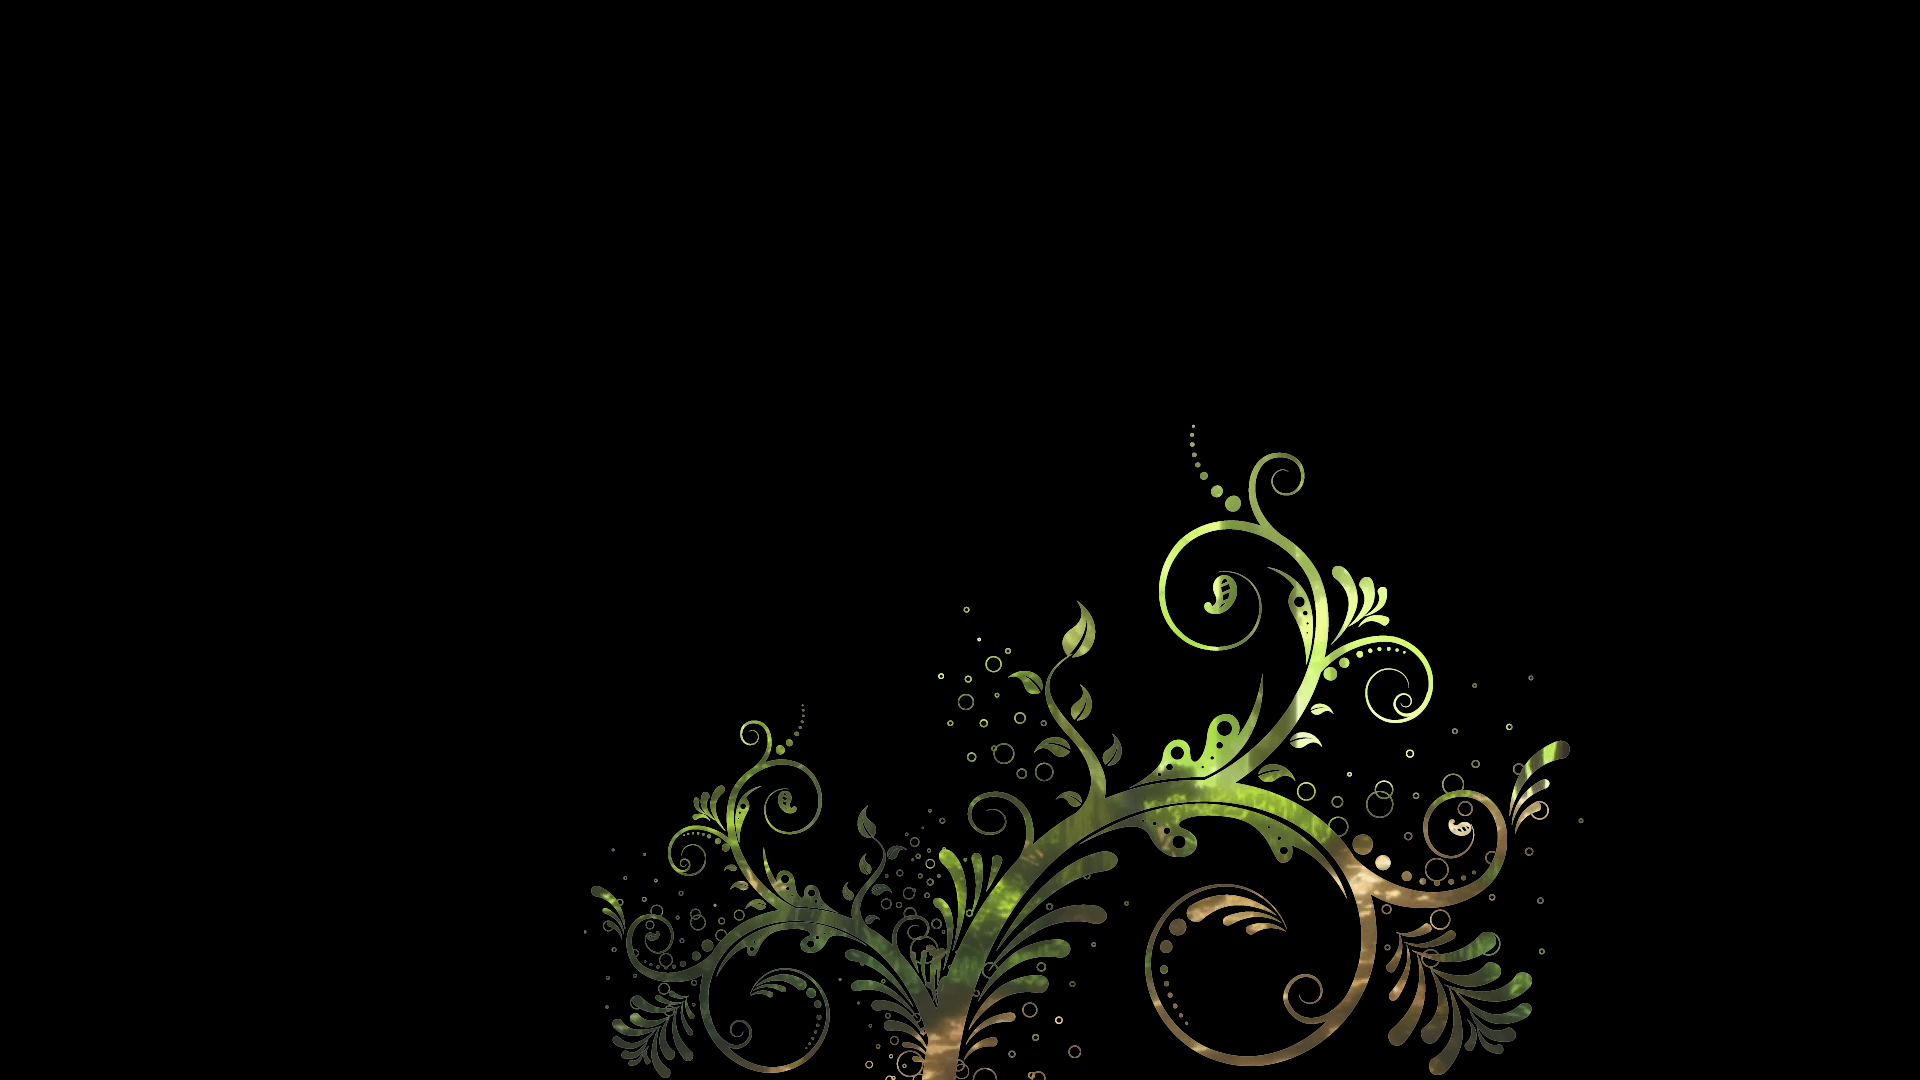 General 1920x1080 floral black background minimalism abstract plants simple background